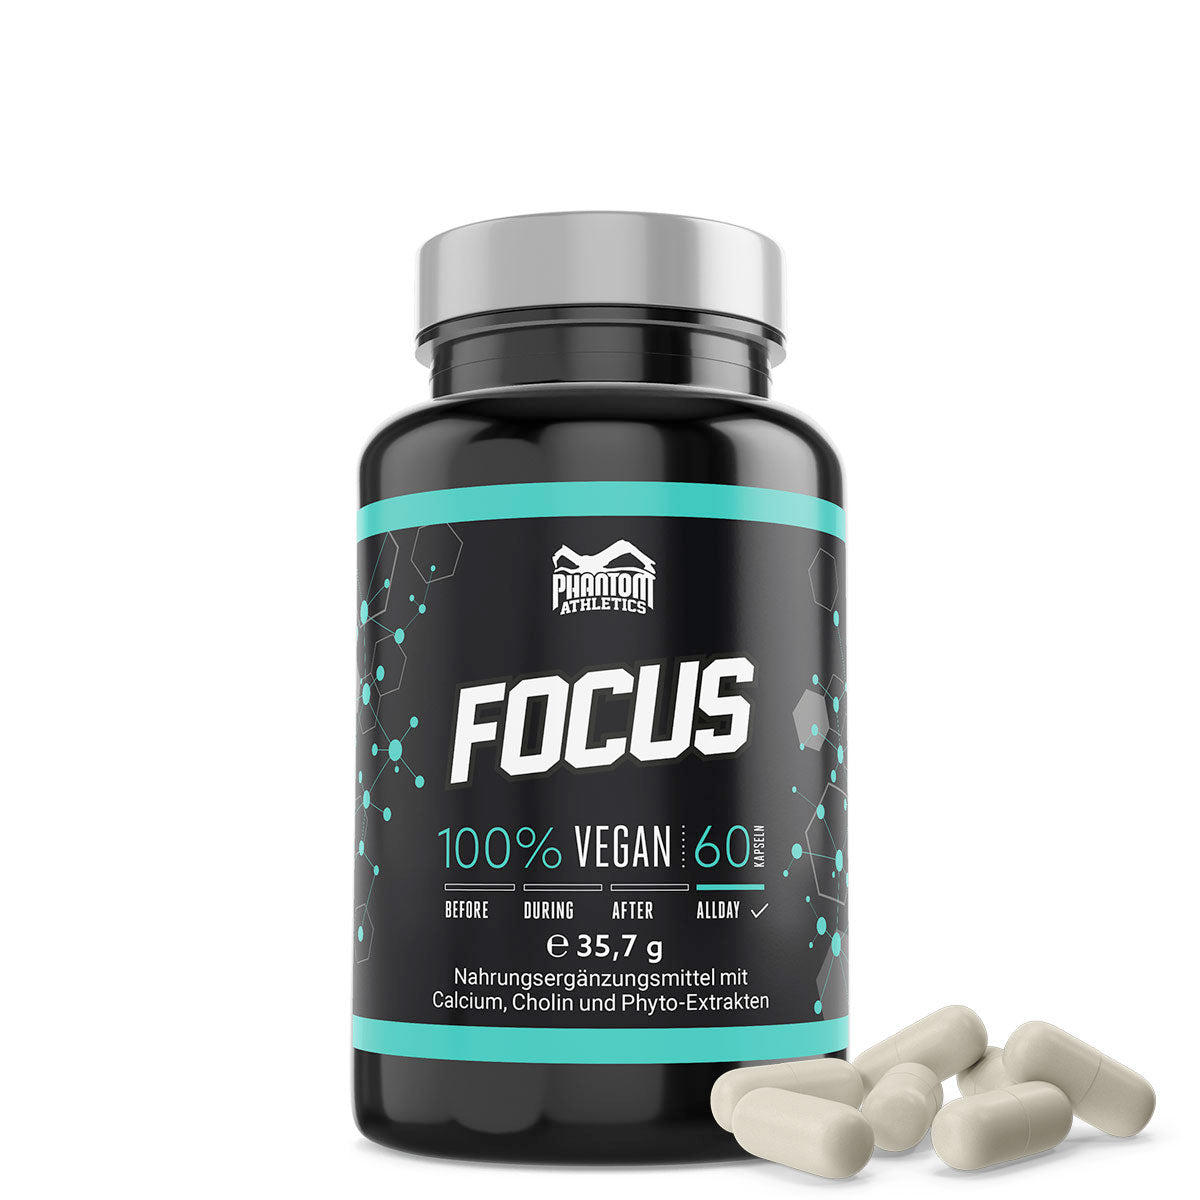 Phantom FOCUS Mind Booster for more focus and concentration during training.